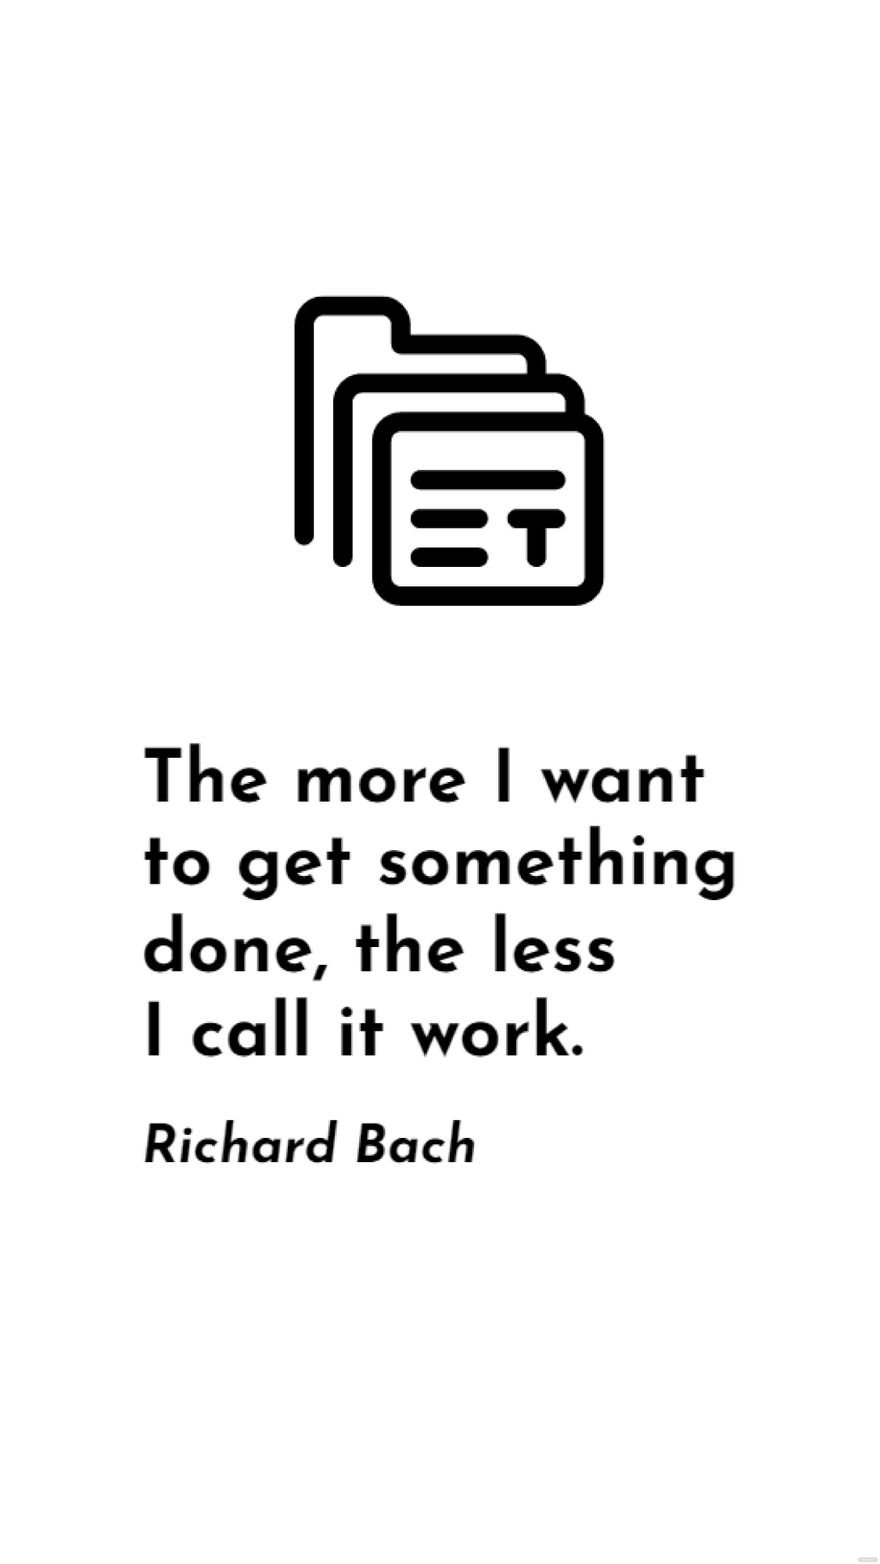 Richard Bach - The more I want to get something done, the less I call it work.